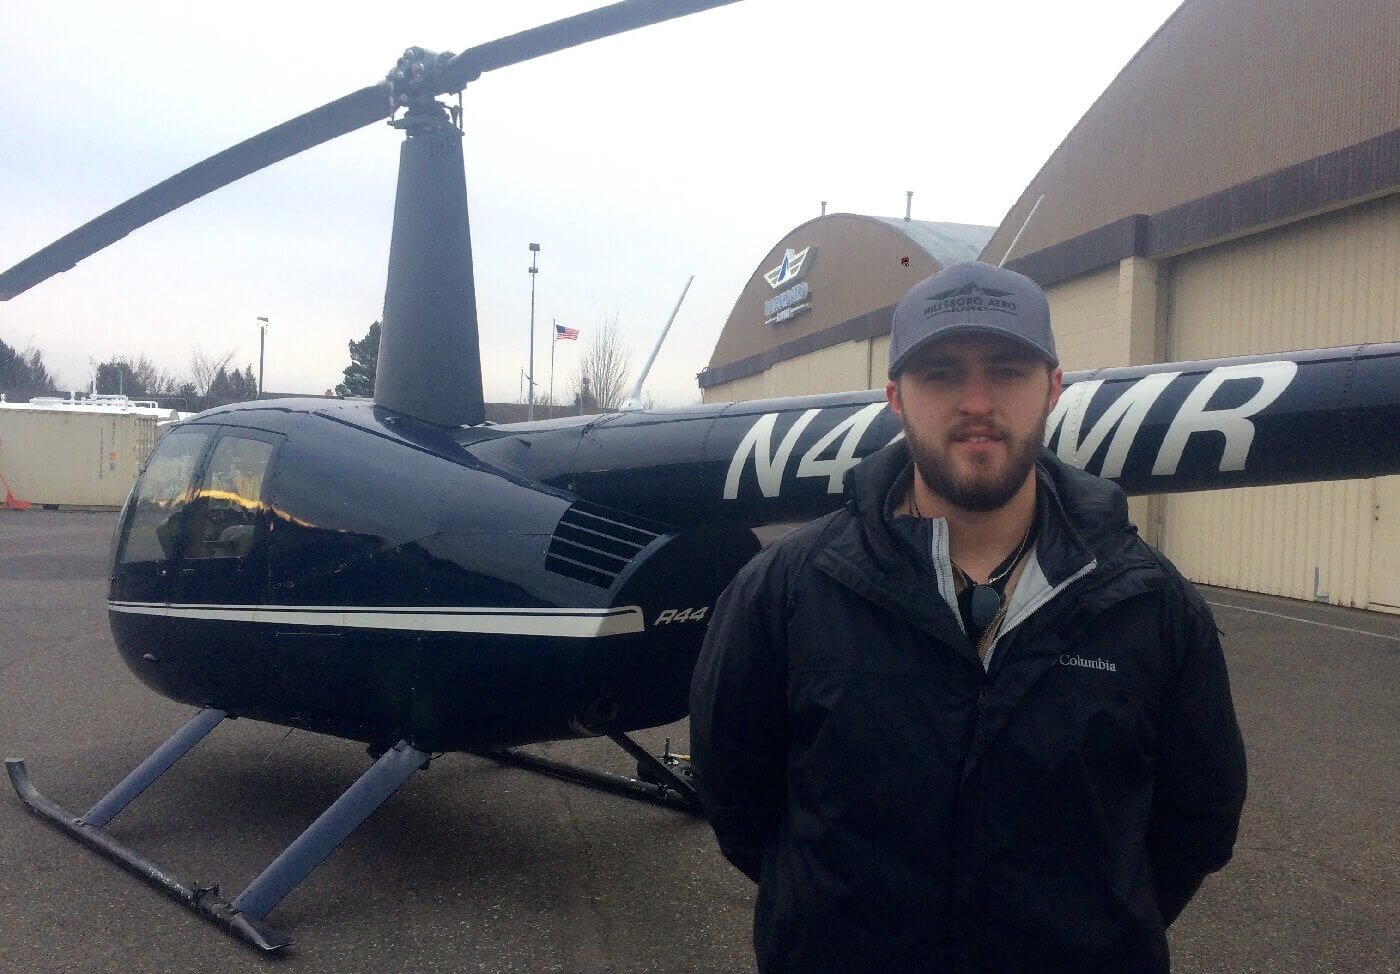 Trent Vick’s interest in aviation was sparked by a 2008 presentation on medical careers that included a fly-in by a helicopter air ambulance out of Missoula, Montana. HAI Photo